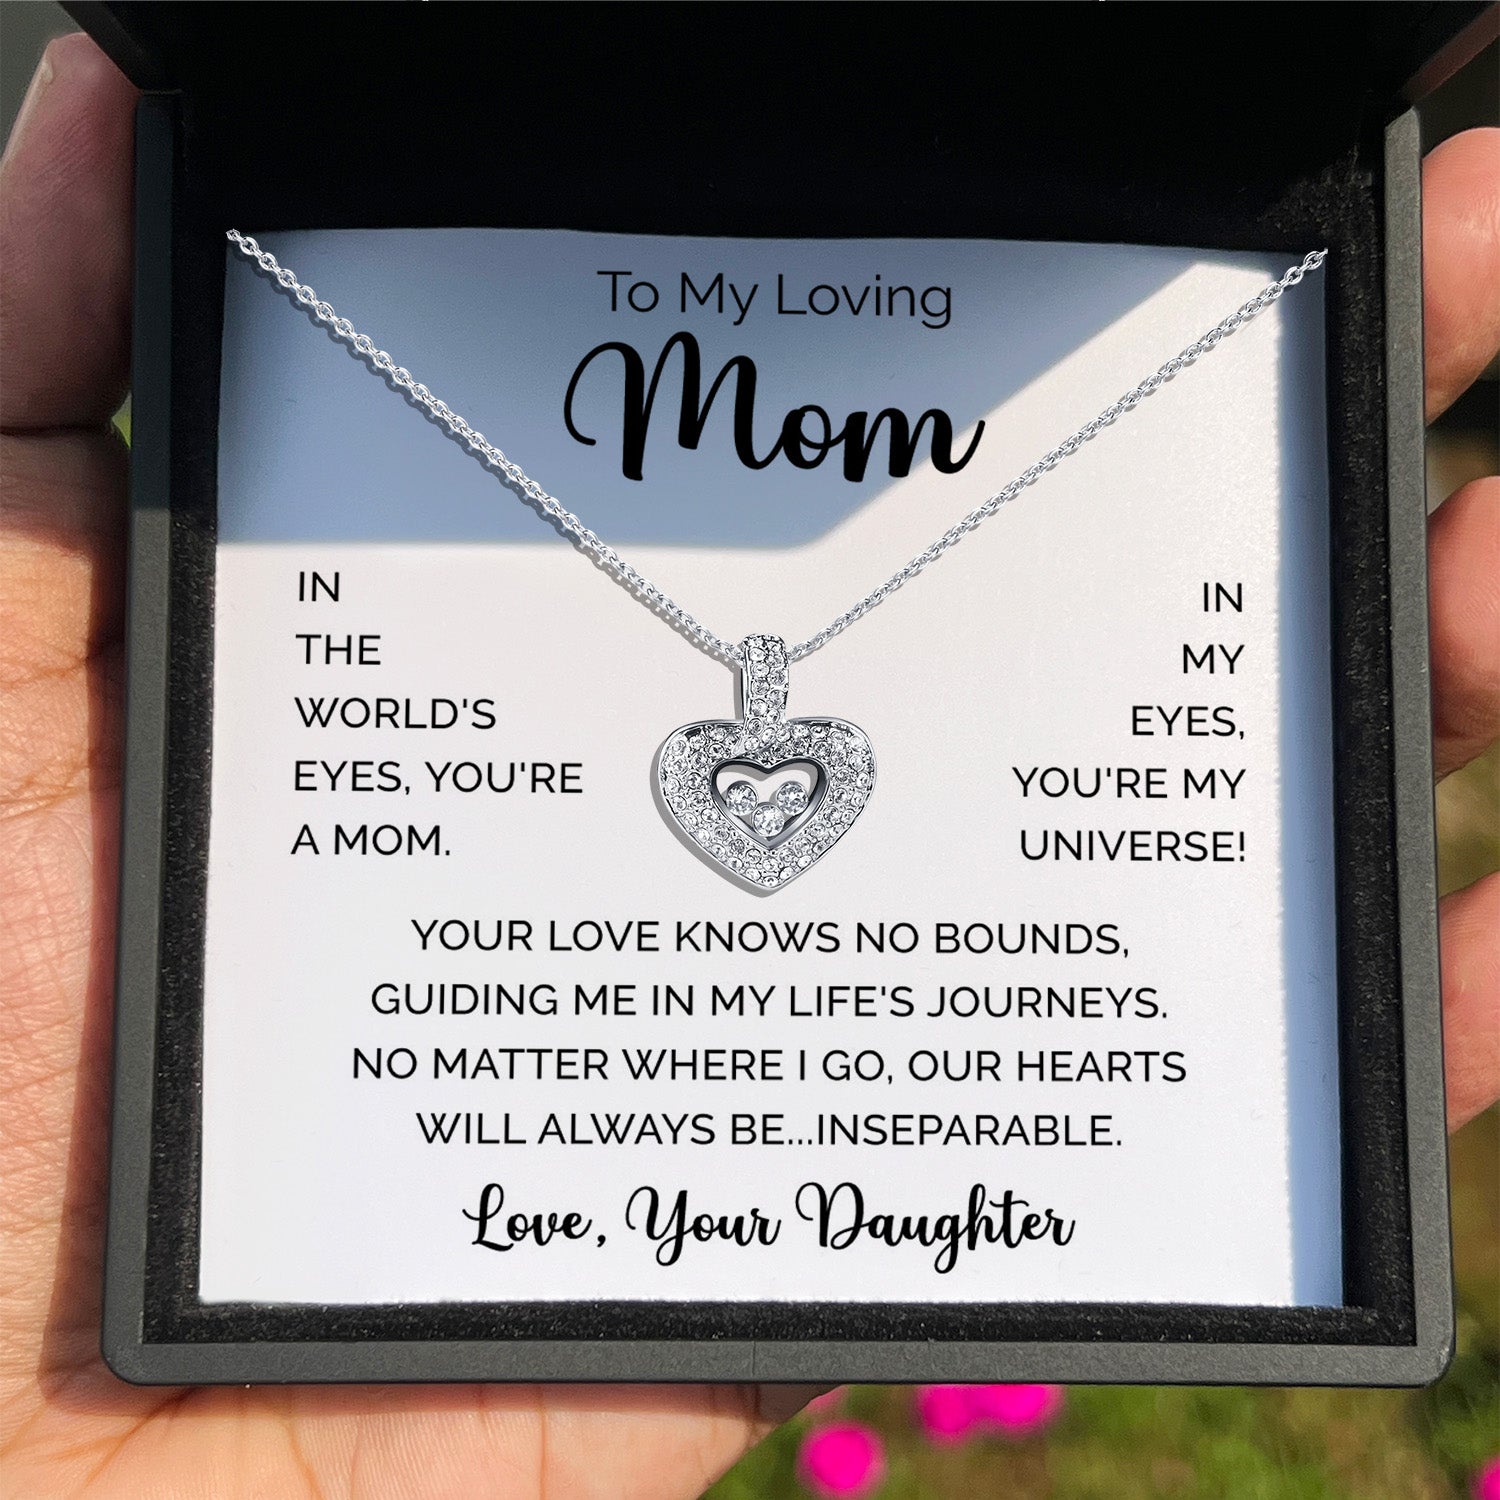 To My Loving Mom - You're My Universe! - Tryndi Floating Heart Necklace